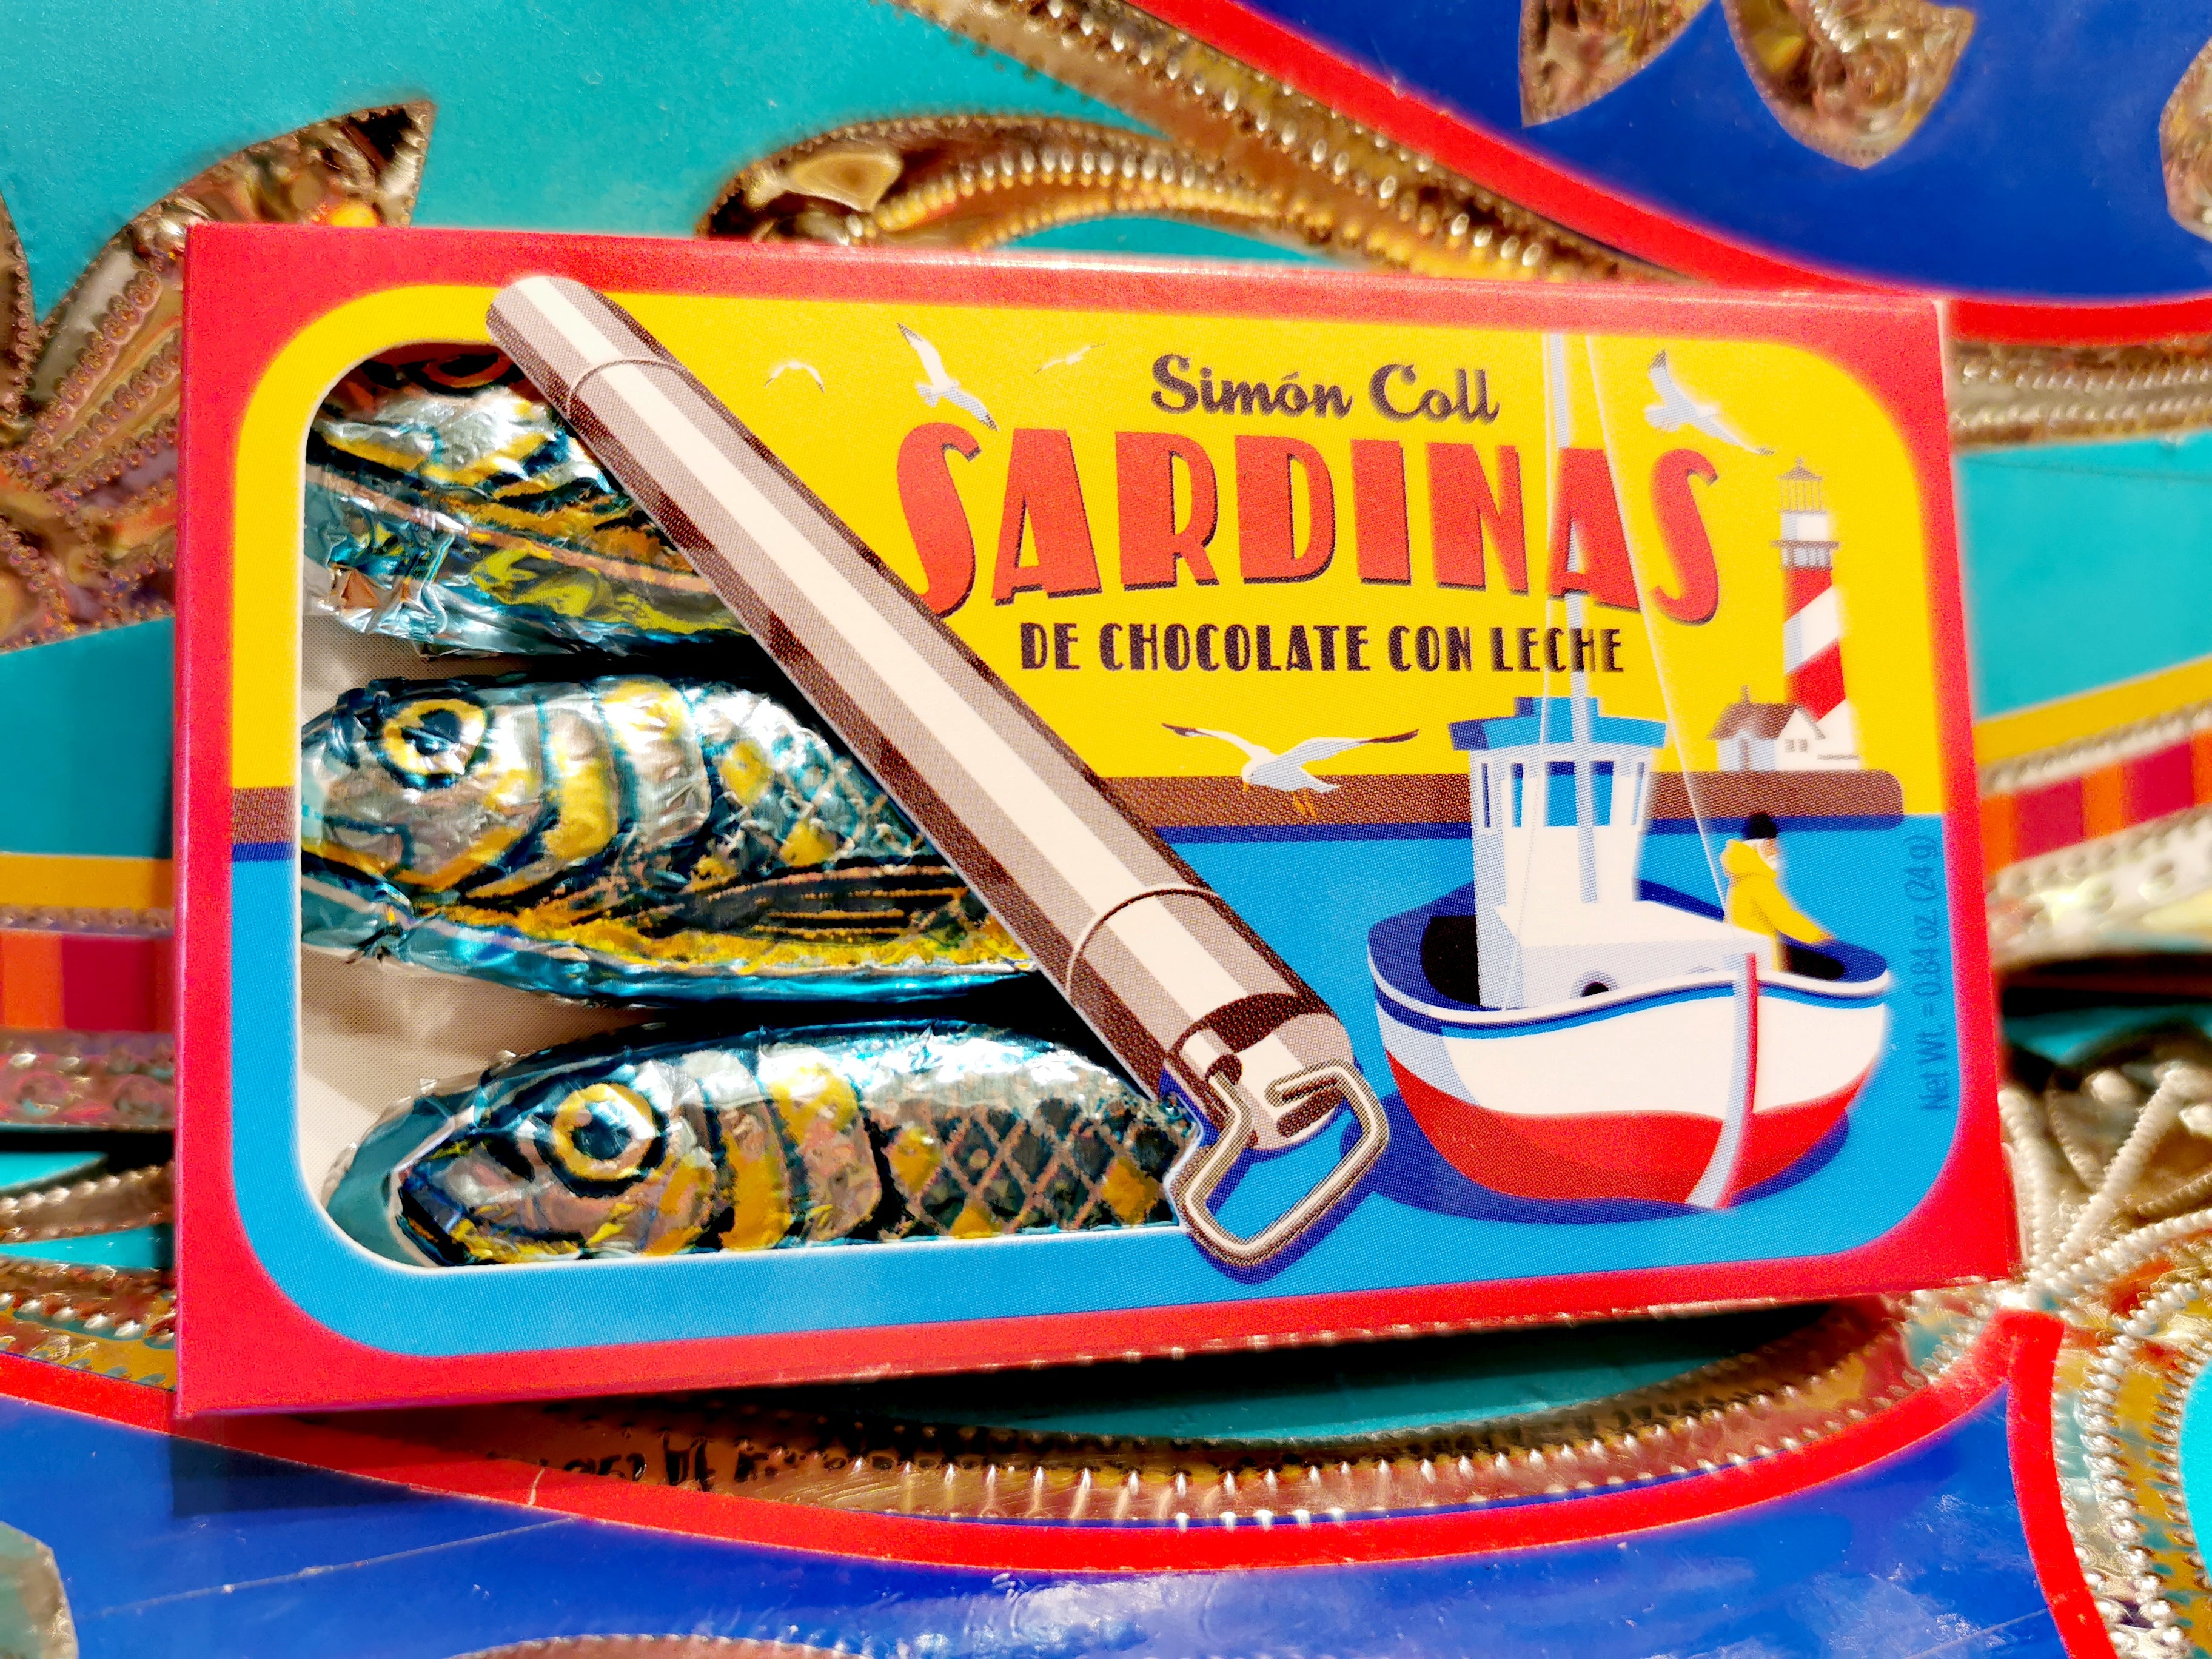 Delicious chocolate foil wrapped sardines, yummy!

Box of 3 ,24g, 10cm x 6cm x 1.5cm

Milk chocolate

Ingredients :sugar, cocoa butter, whole milk powder, cocoa mass, skimmed milk powder, emulsifier(soya lecithin), and flavouring. Cocoa solids 30%min,milk solids 14%min,may contain nut traces. 


